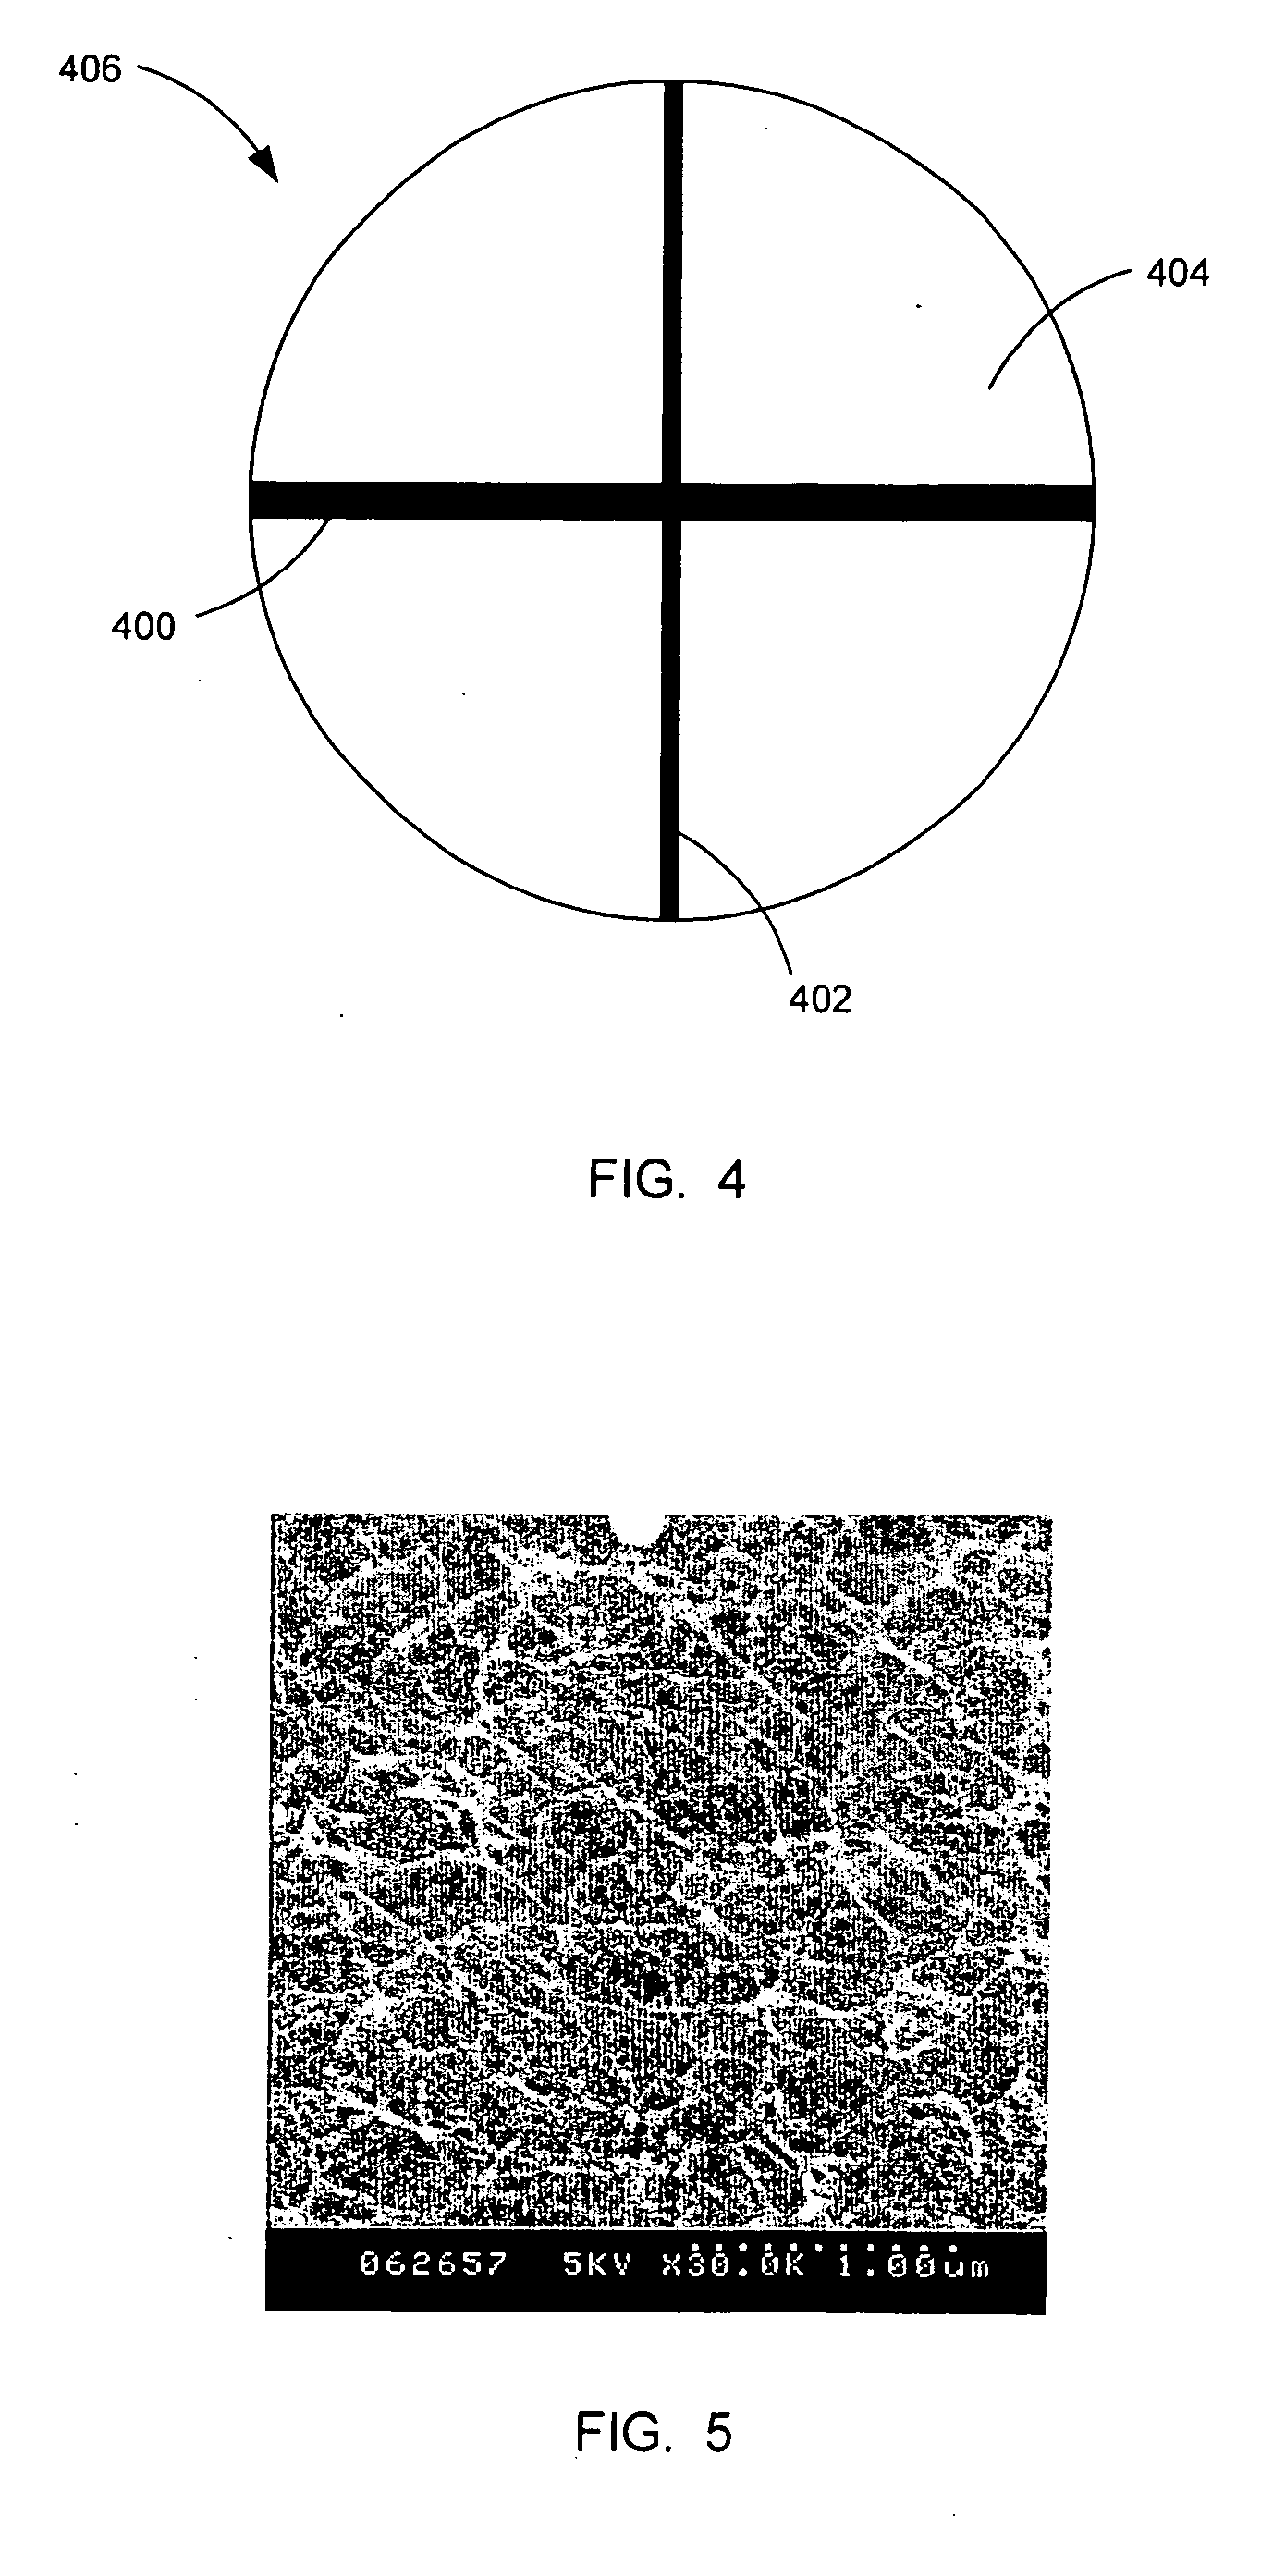 Methods for producing and using catalytic substrates for carbon nanotube growth